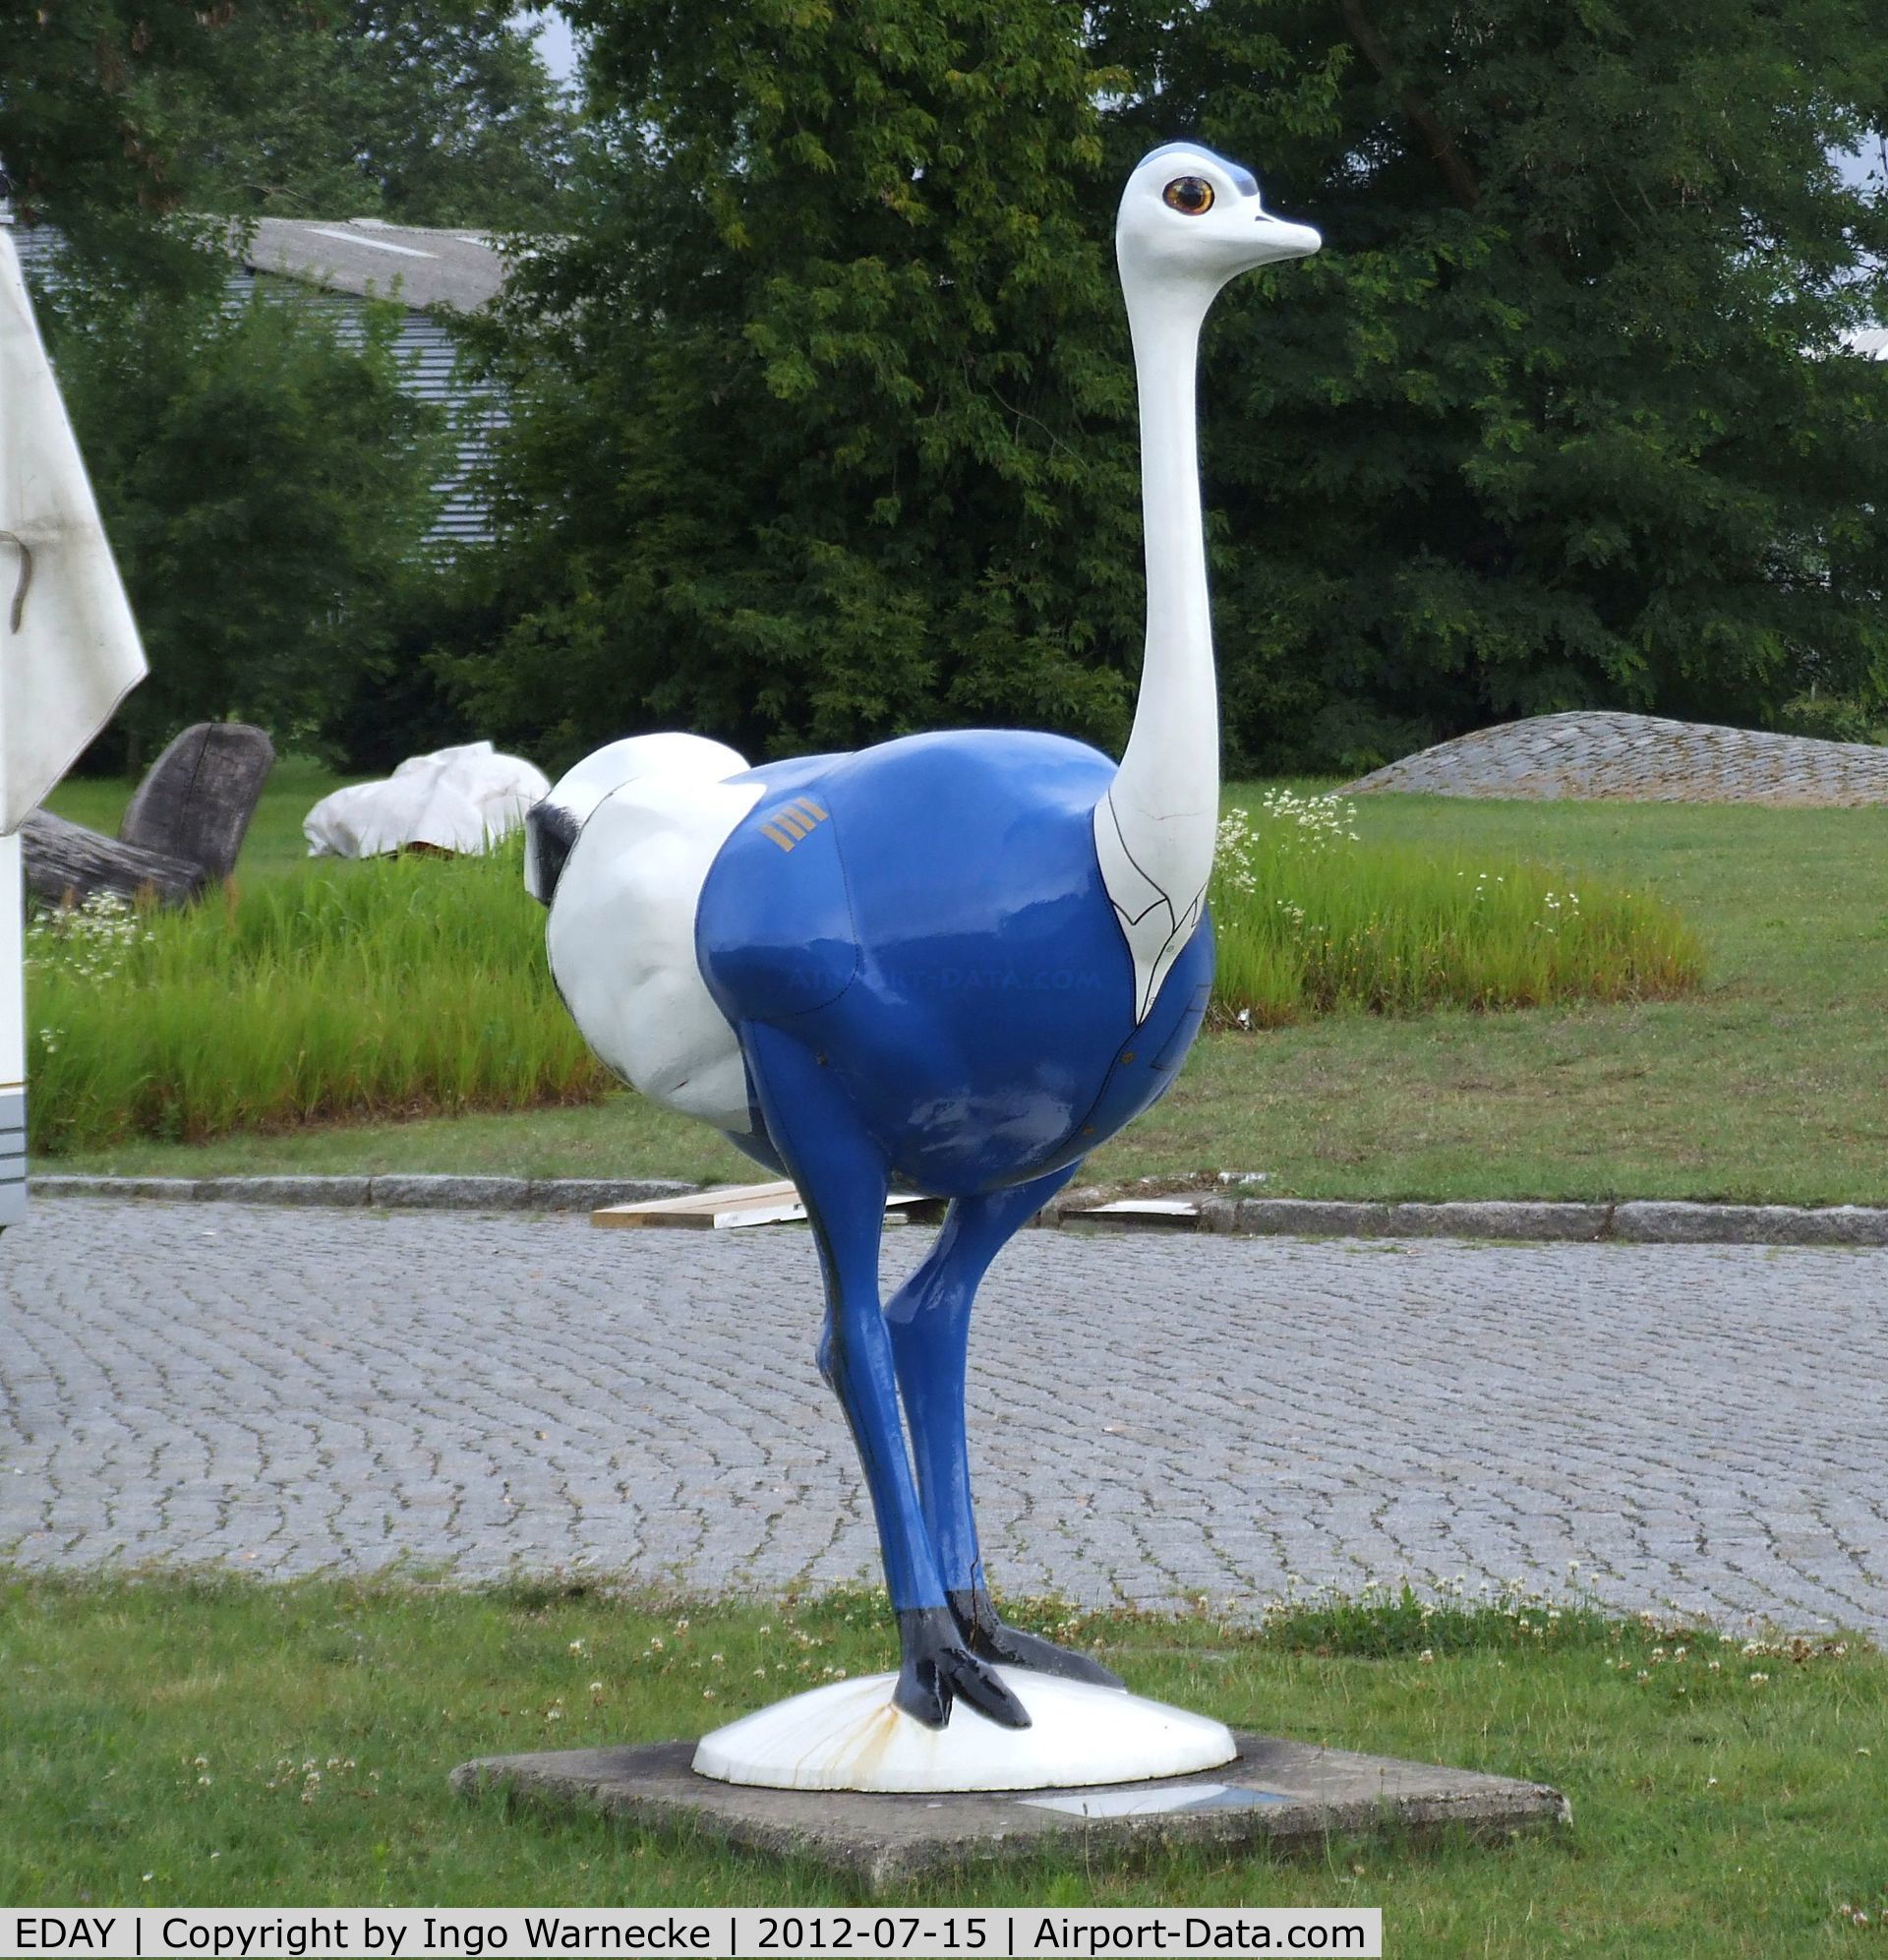 EDAY Airport - Strausberg airfield mascot (these ostriches can be found all over the town)